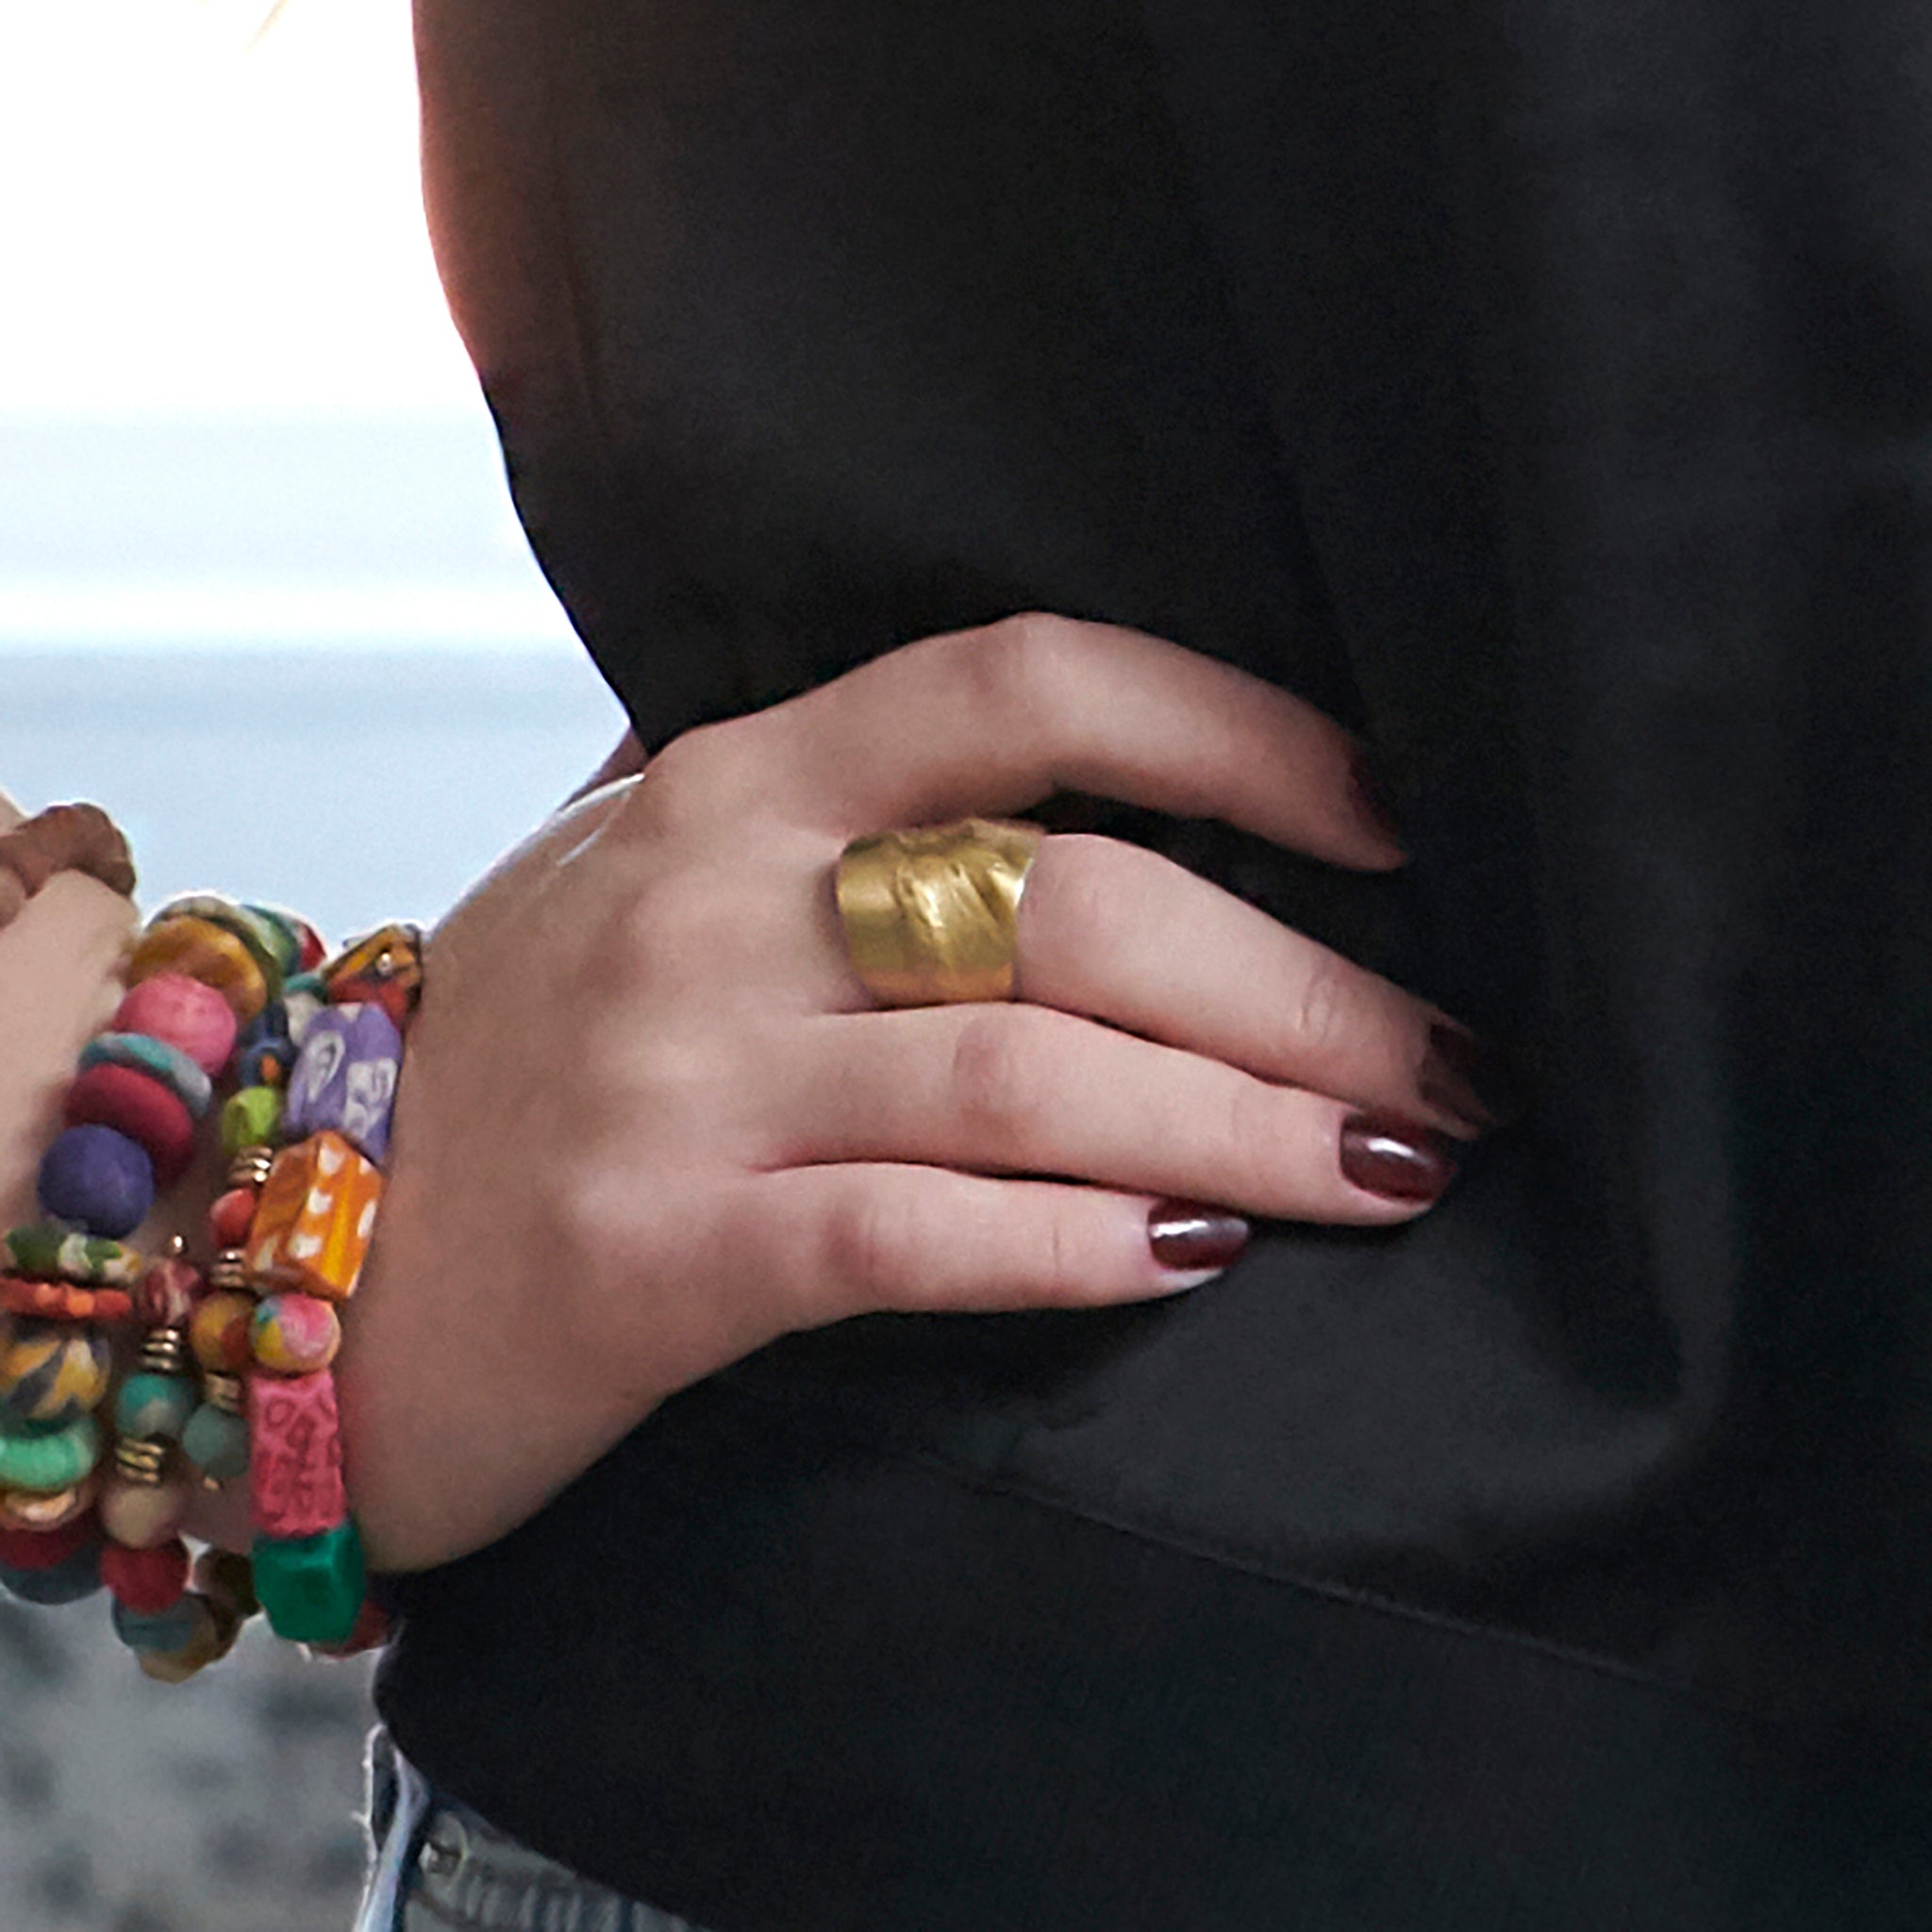 A close up on a woman's hand on her hip featuring a large gold textured ring.